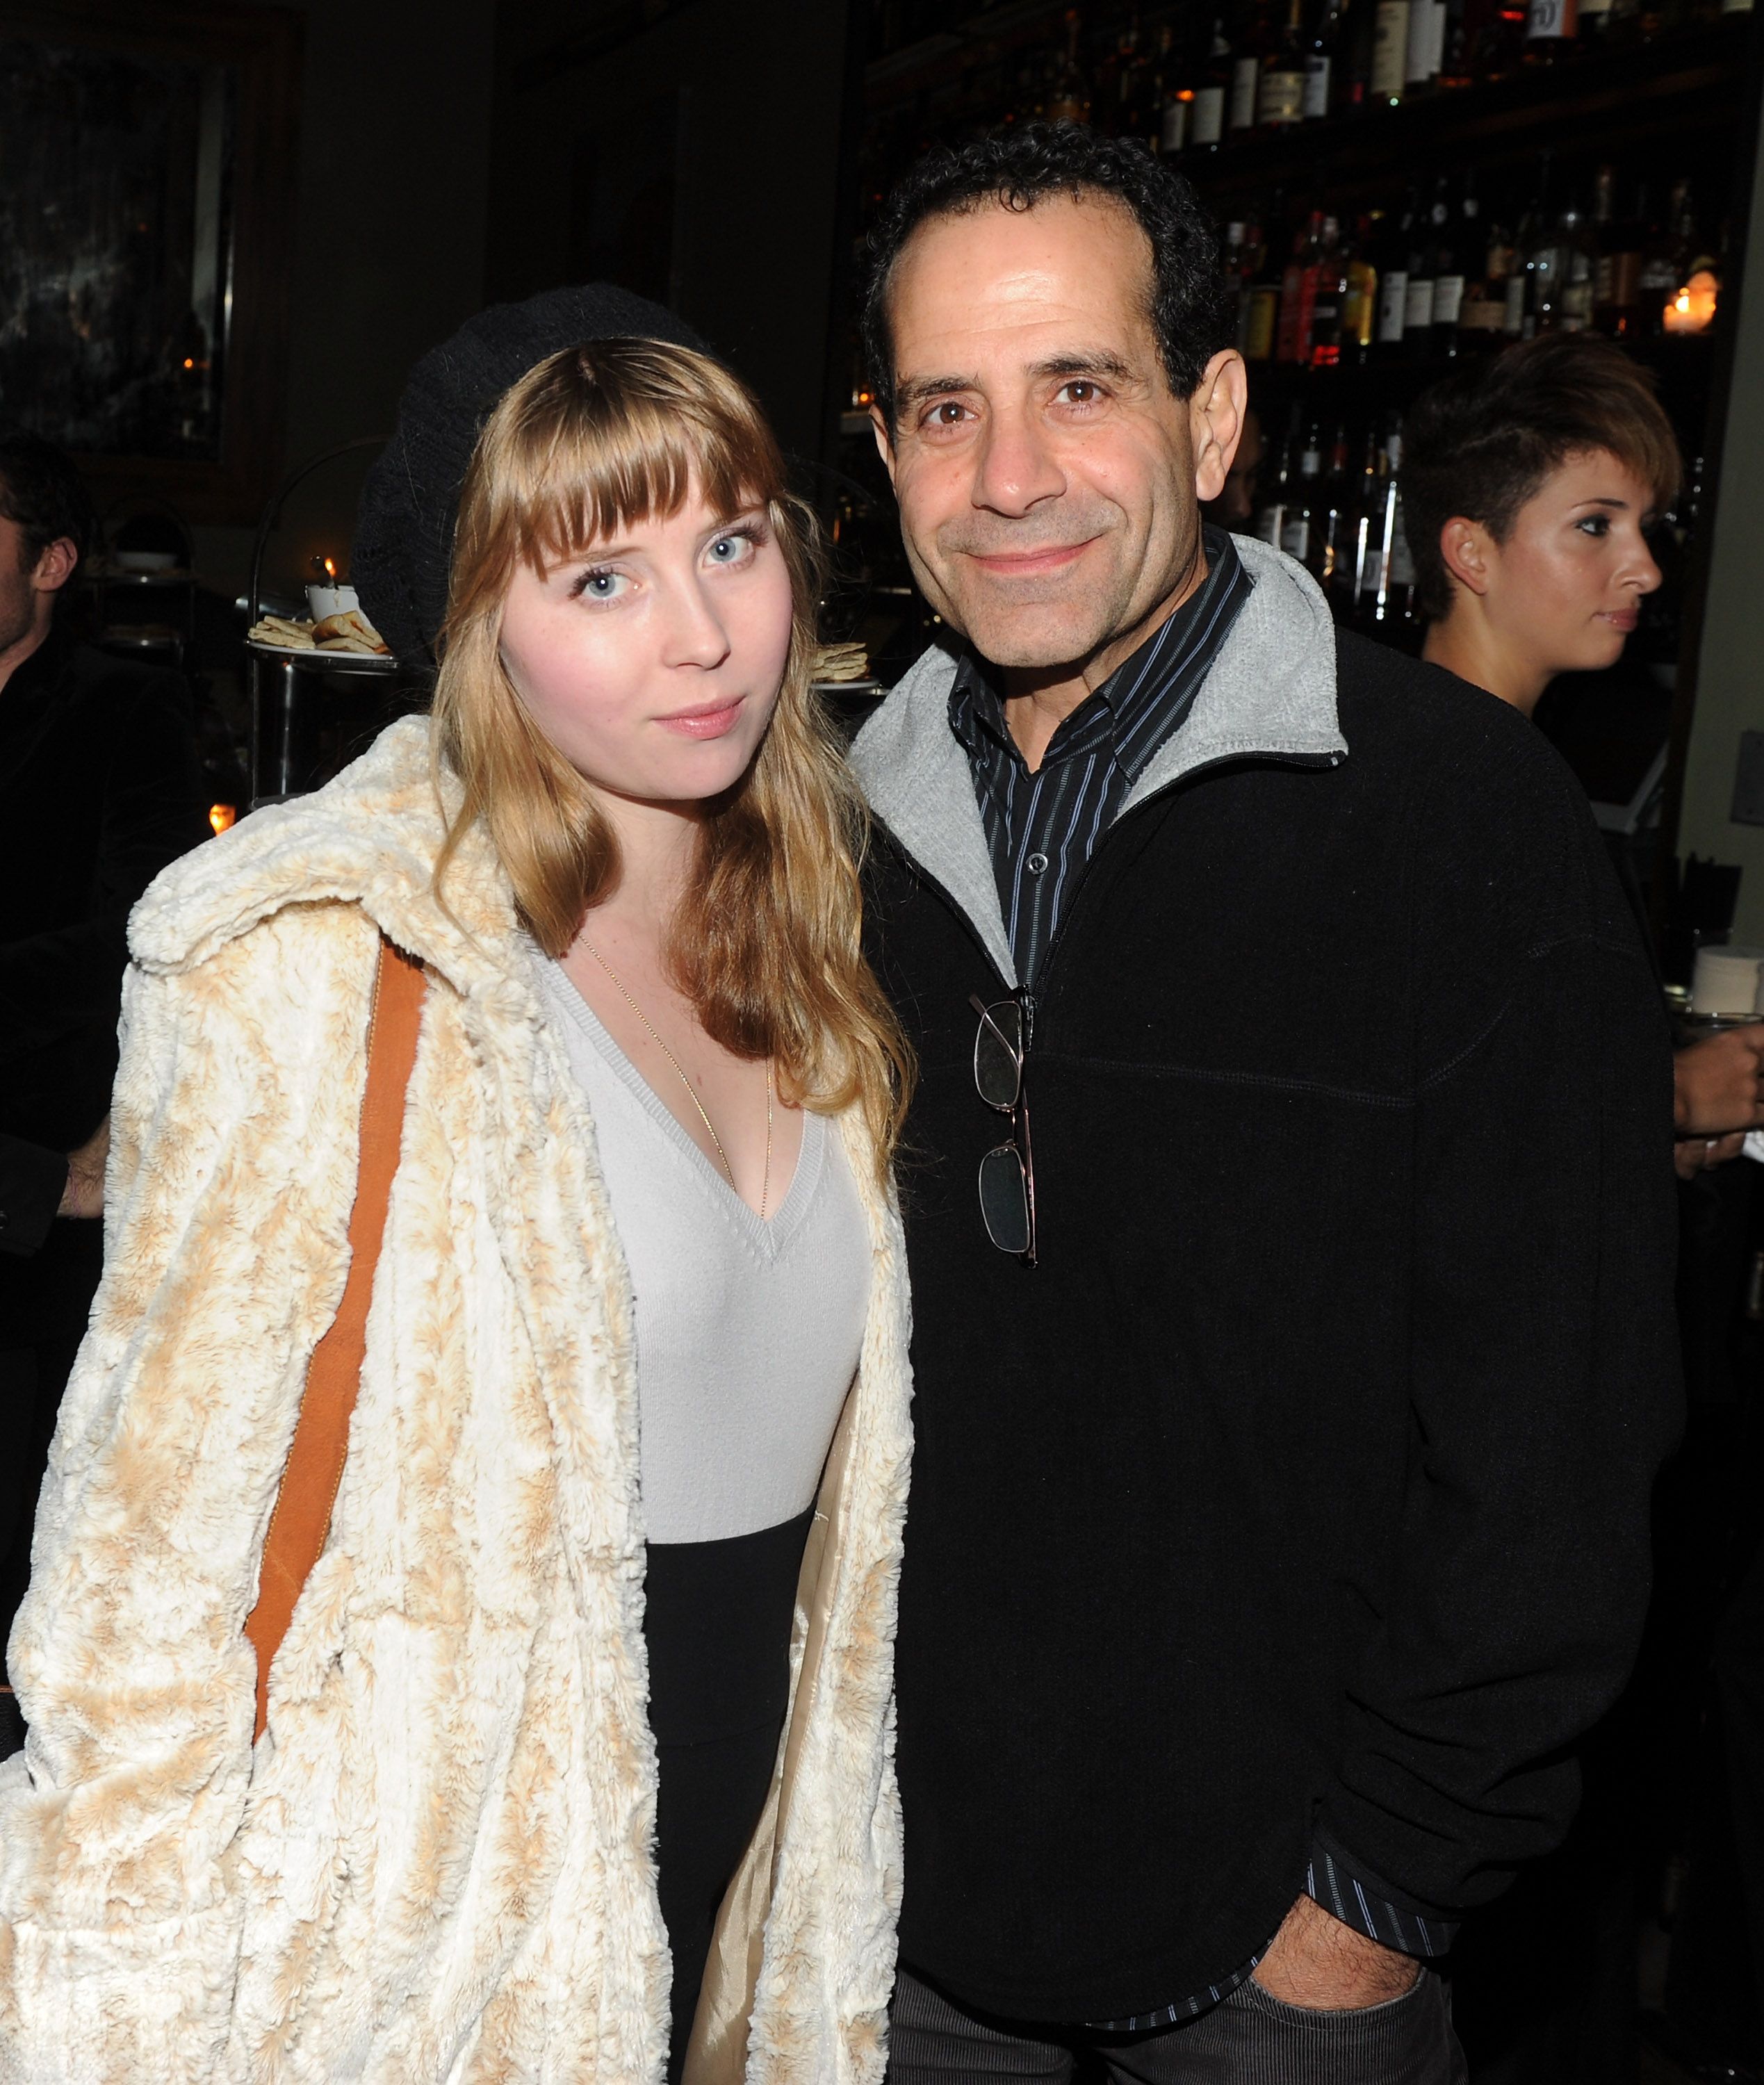 Tony Shalhoub with daughter Josie at the after party for the Cinema Society & Sony Pictures Classics screening of "Made In Dagenham" in  2010 in New York City | Source: Getty Images